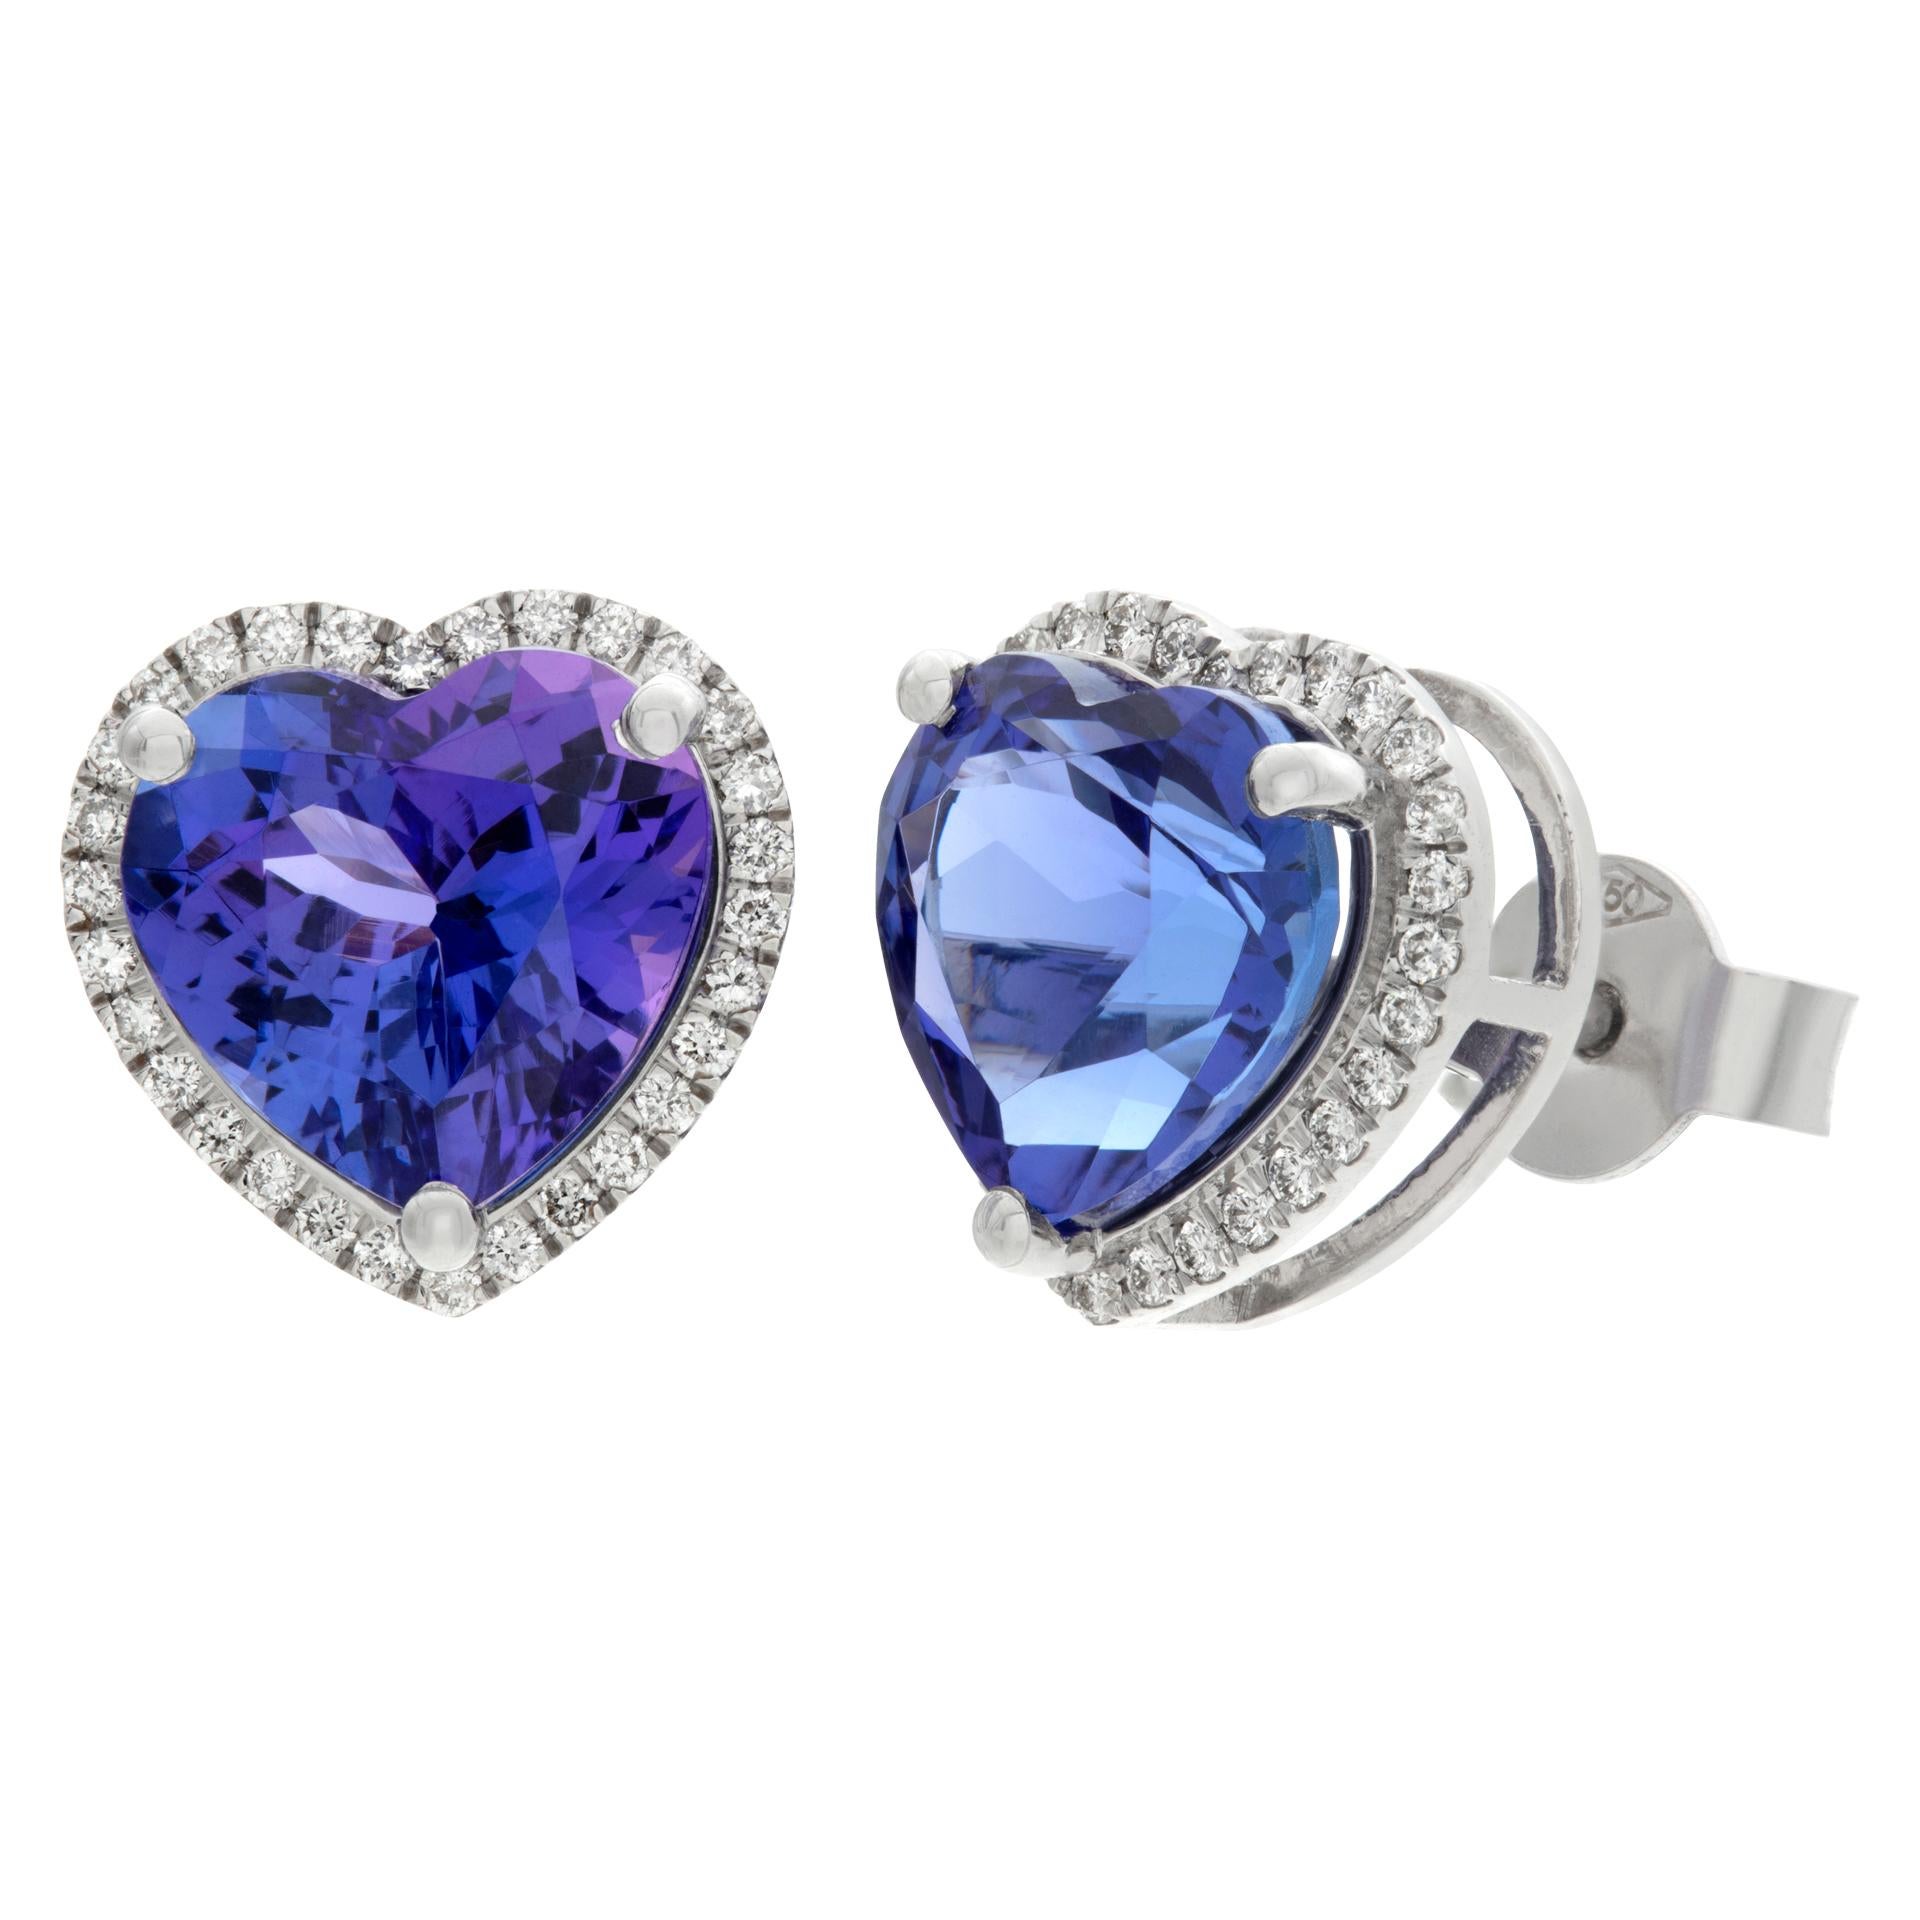 Heart tanzanite and diamonds stud earrings in 18k white gold, with 5.52 carats in purple/blue tanzanite and 0.24 carats in F-G color, VS clarity diamond accents. Size 11mm x 11mm.